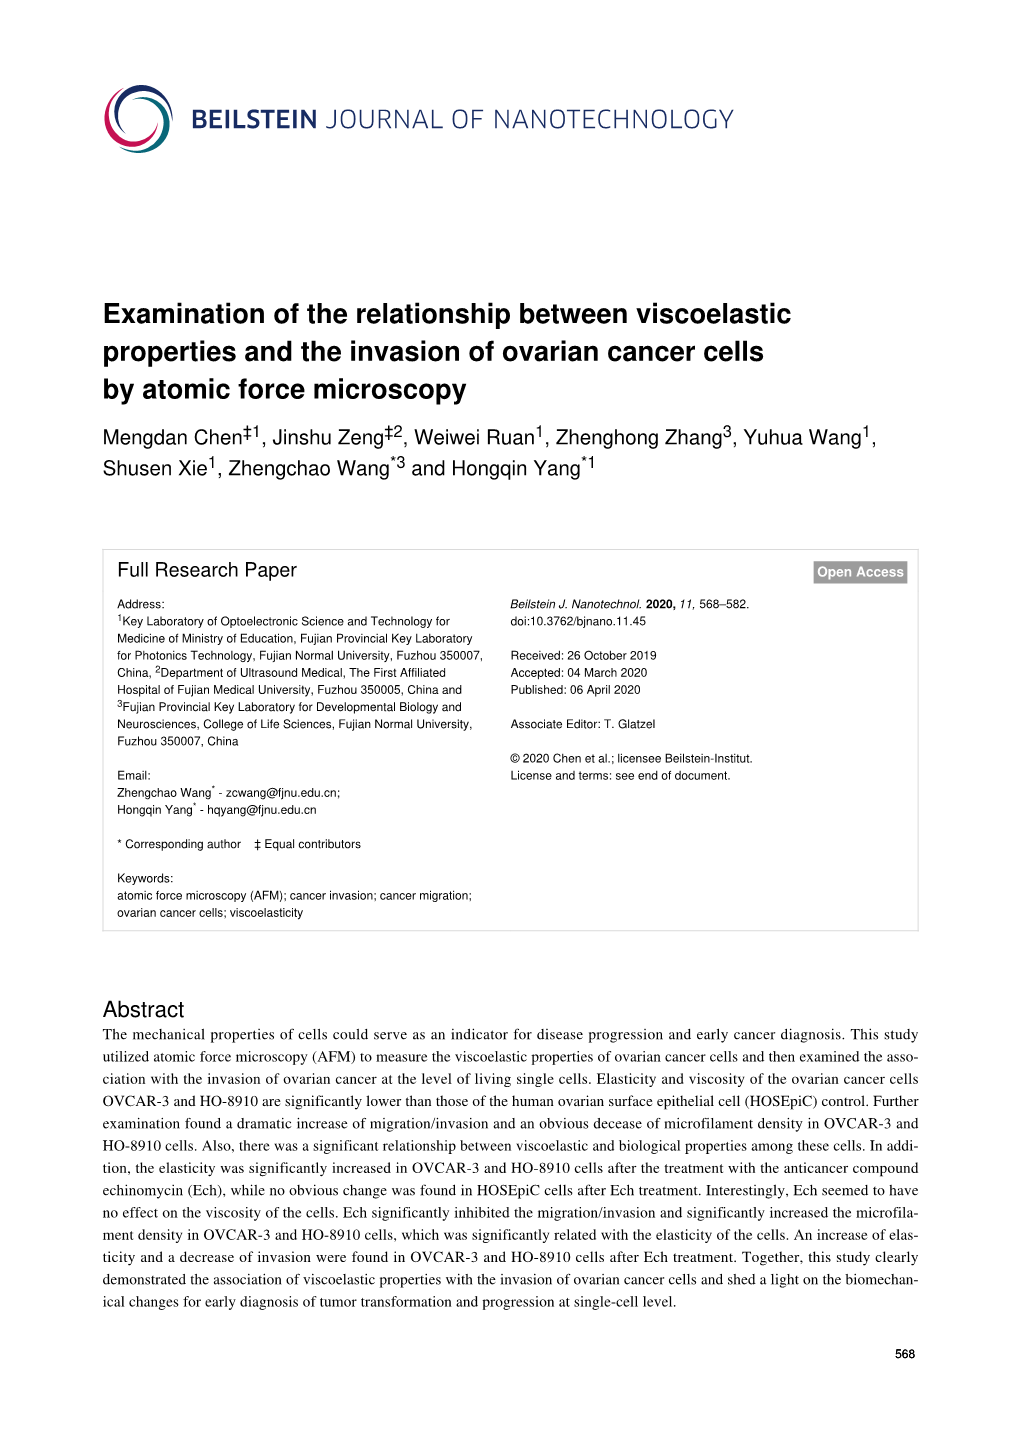 Examination of the Relationship Between Viscoelastic Properties and the Invasion of Ovarian Cancer Cells by Atomic Force Microscopy